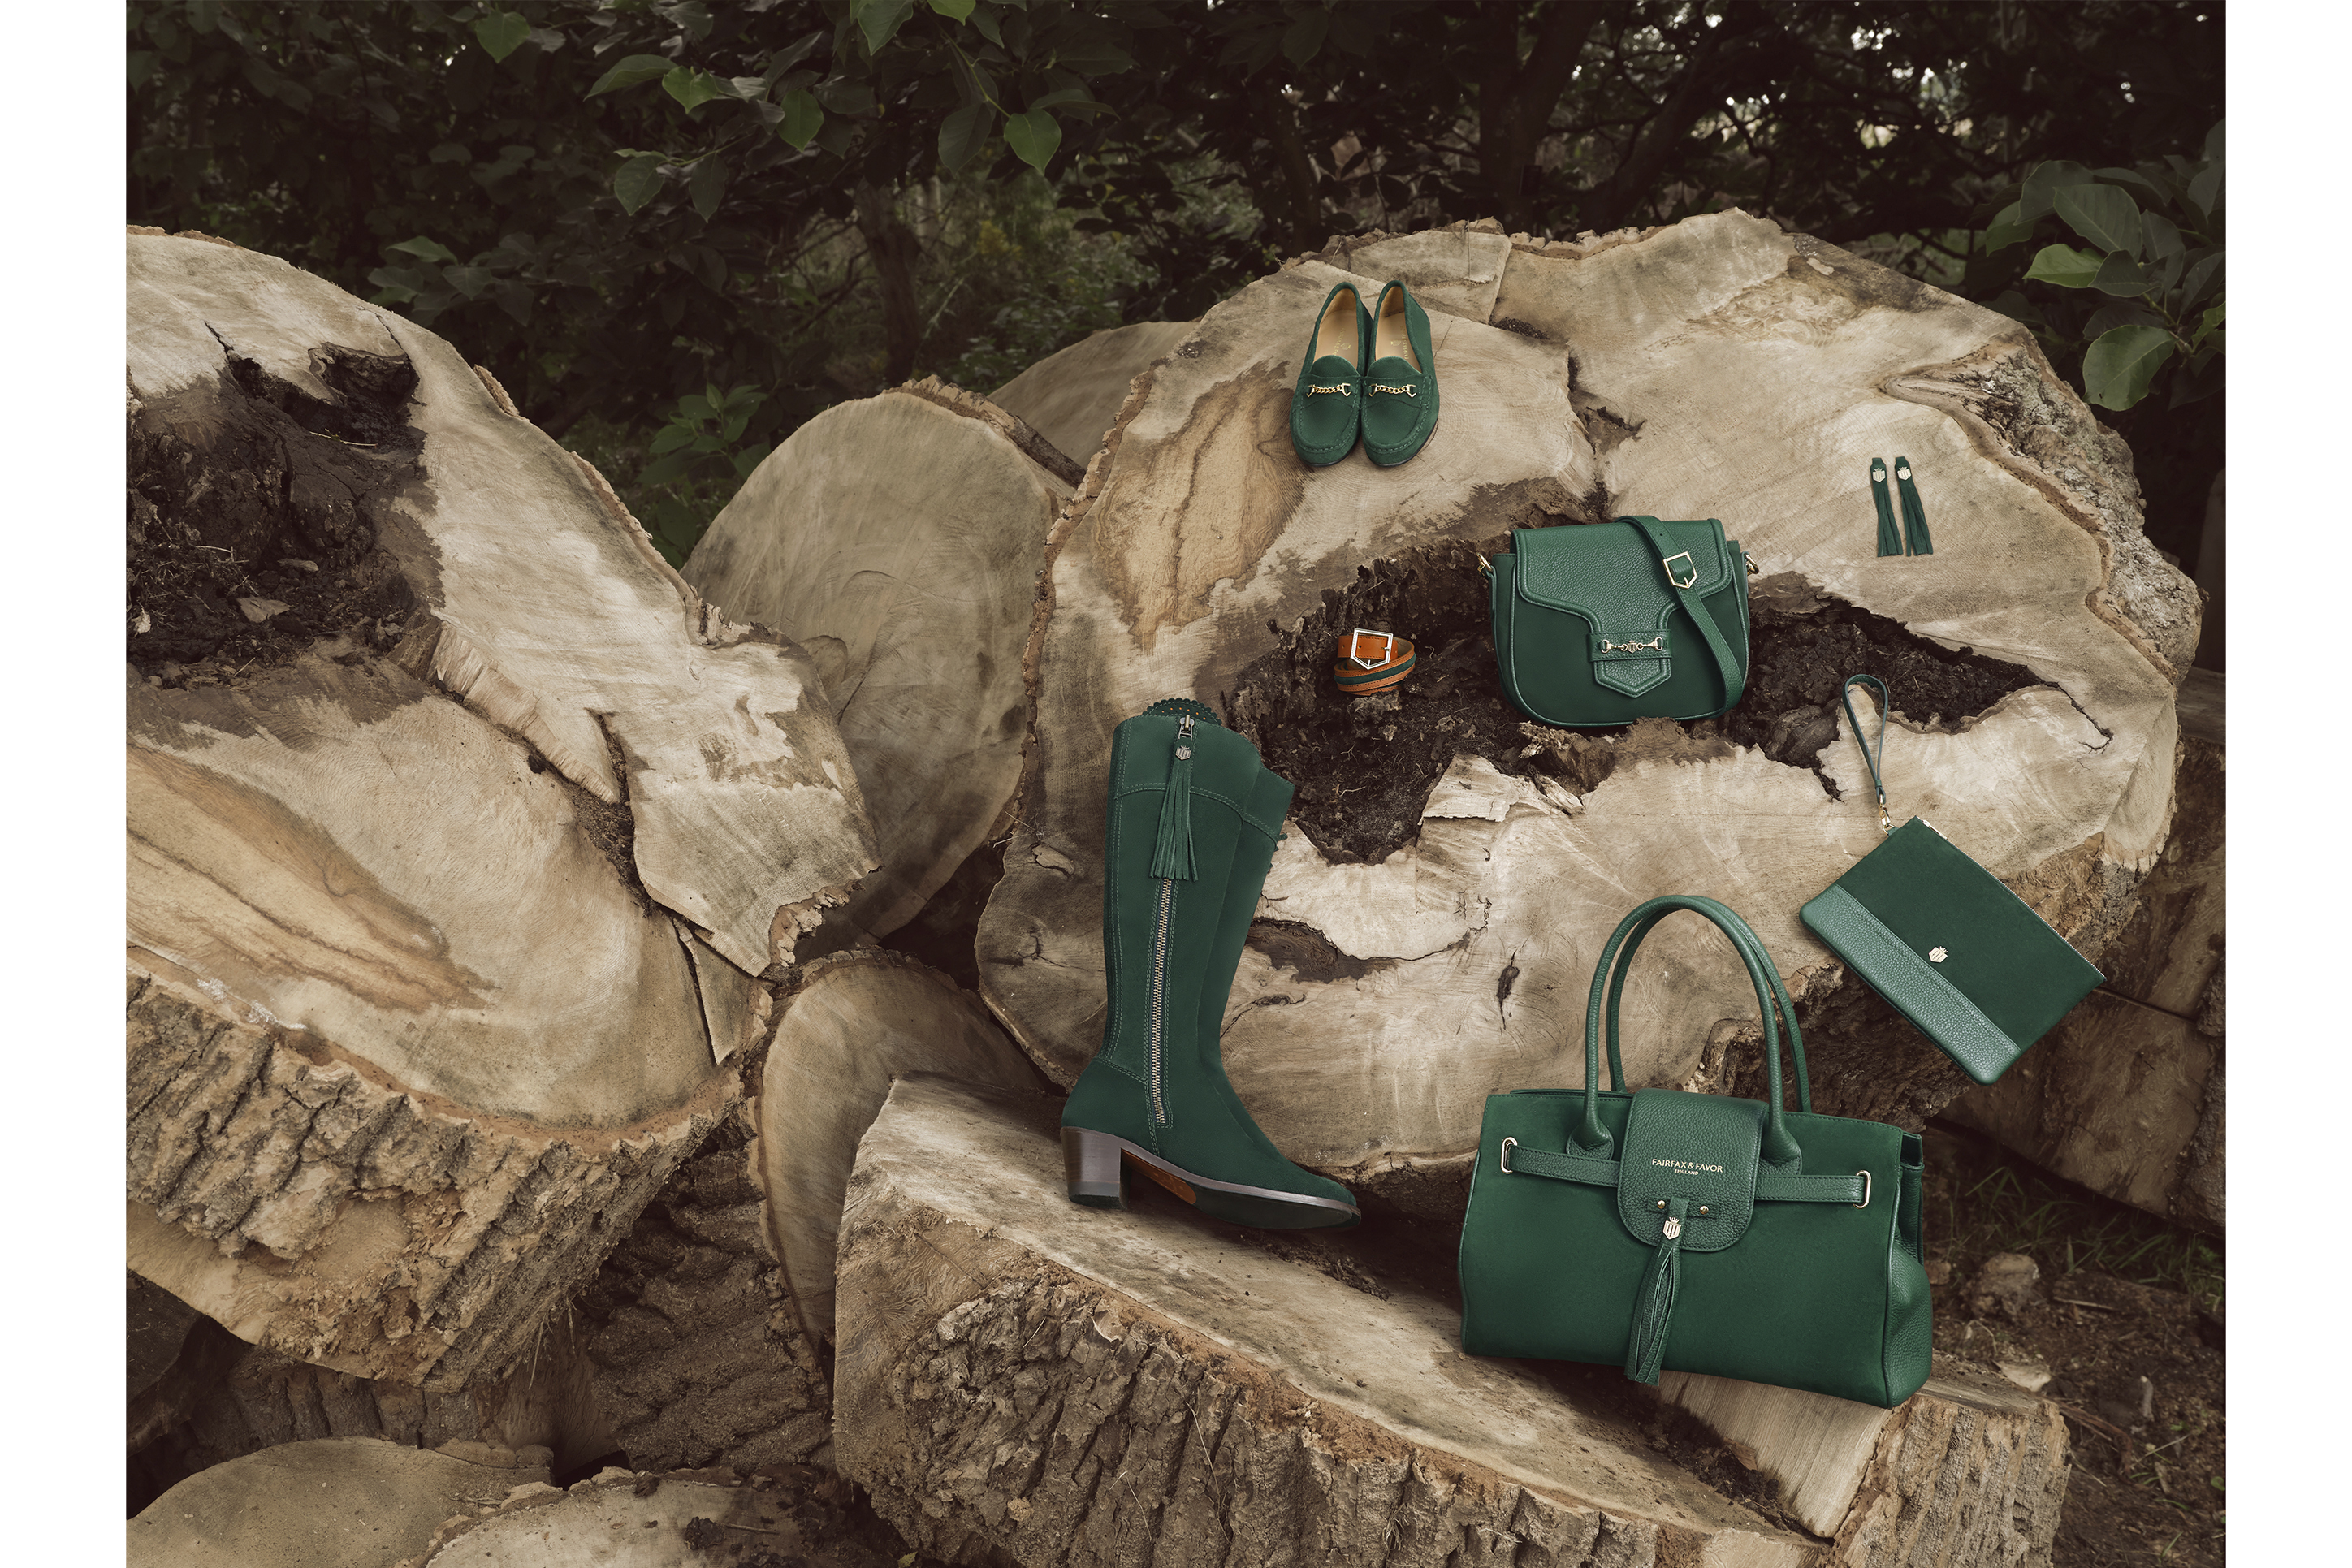 Green Hand bags and boots sitting on a wooden logs in a forest setting for a product photo shoot for Fairfax & Favour